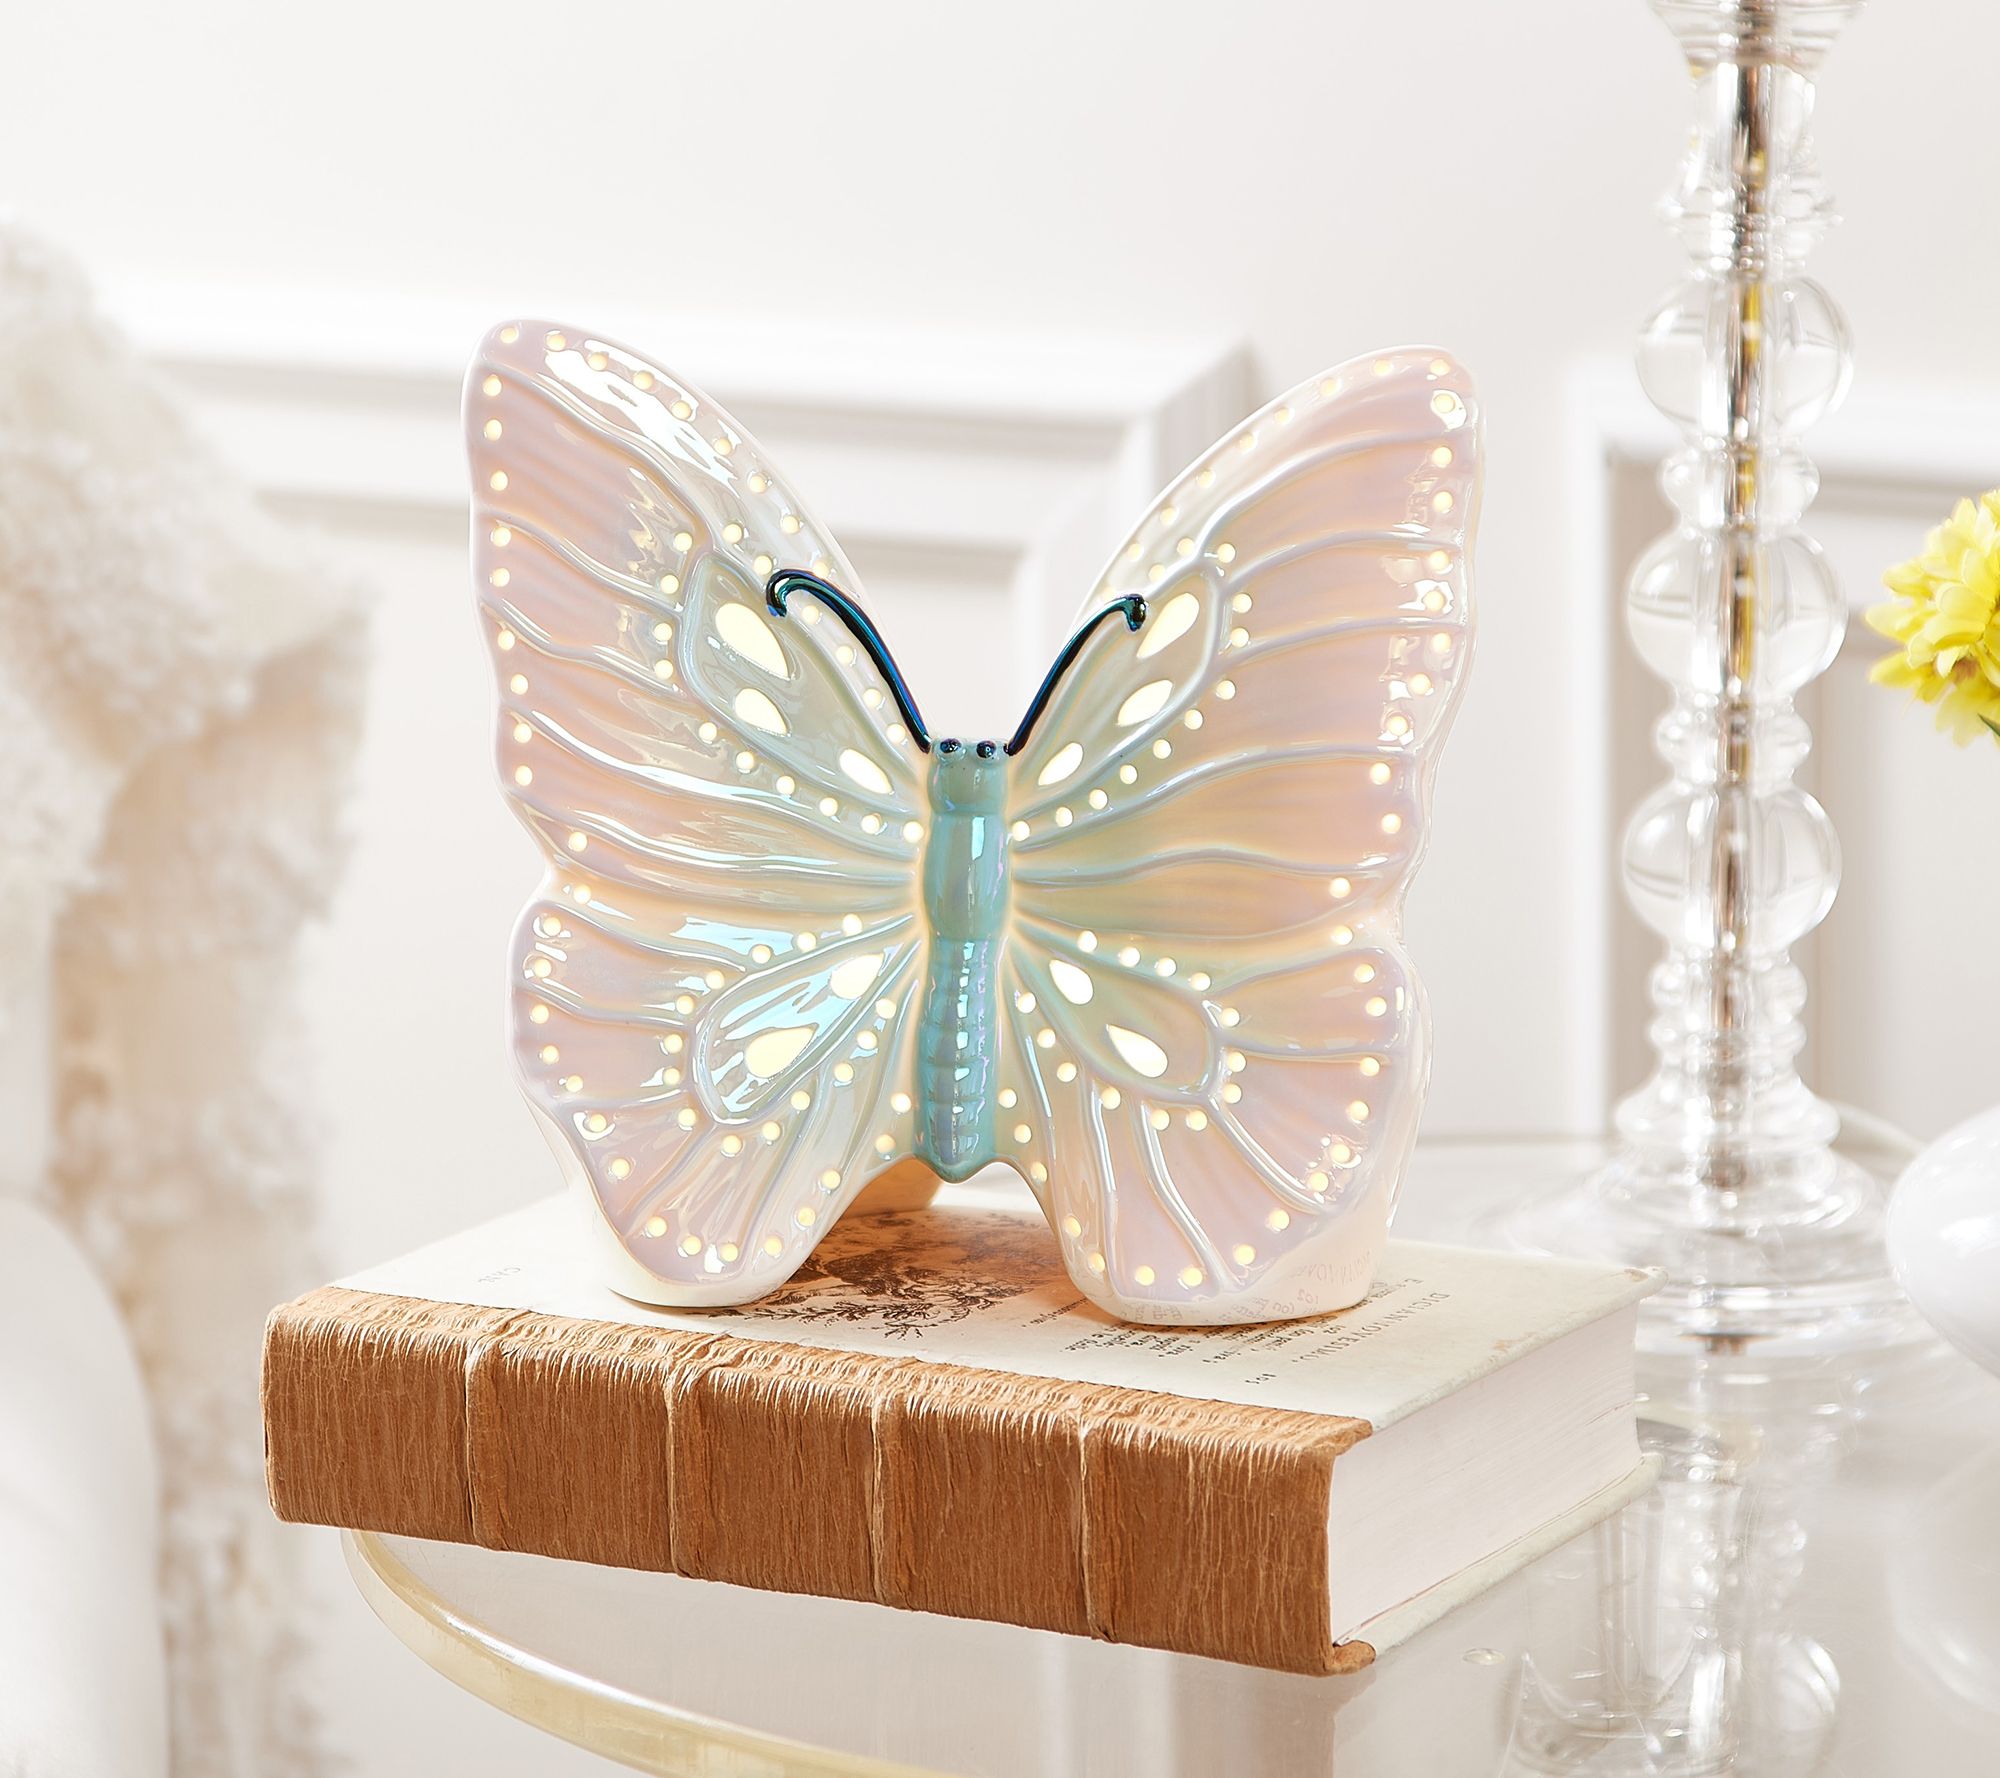 8 Illuminated Iridescent Porcelain Butterfly by Valerie 